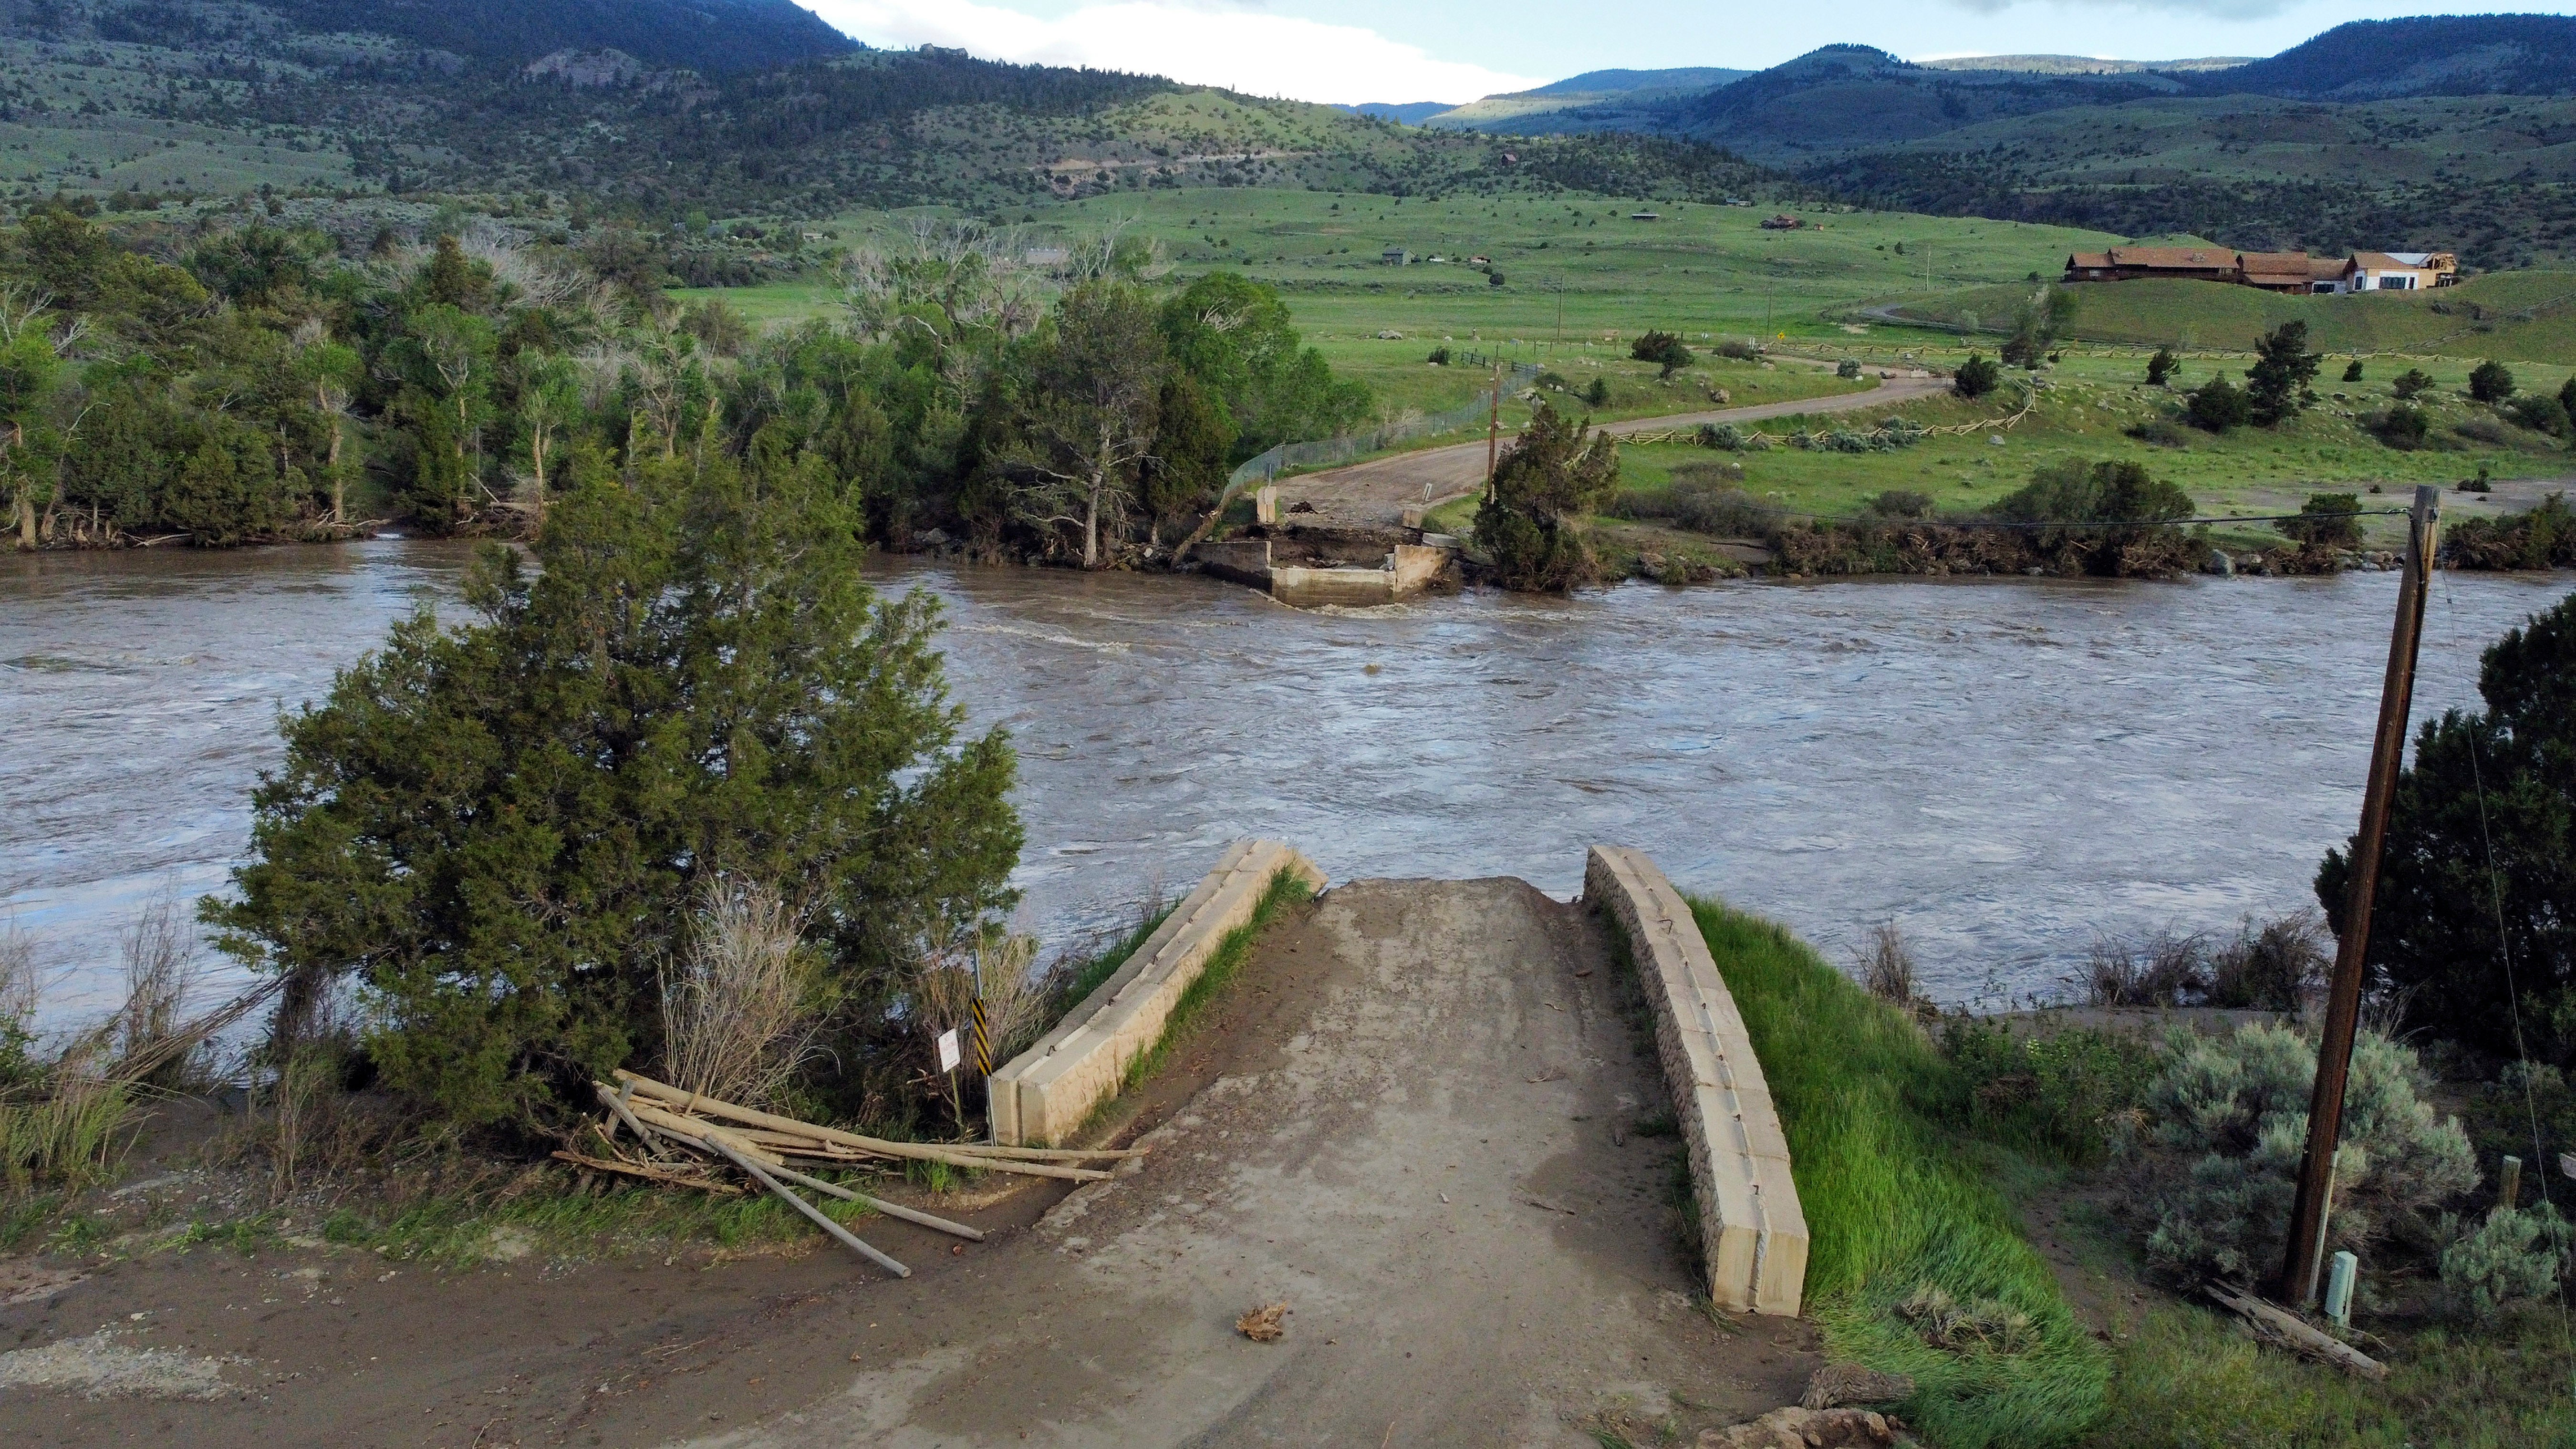 A washed out bridge shown along the Yellowstone River Wednesday, June 15, 2022, near Gardiner, Mont.  (Photo: Rick Bowmer, AP)